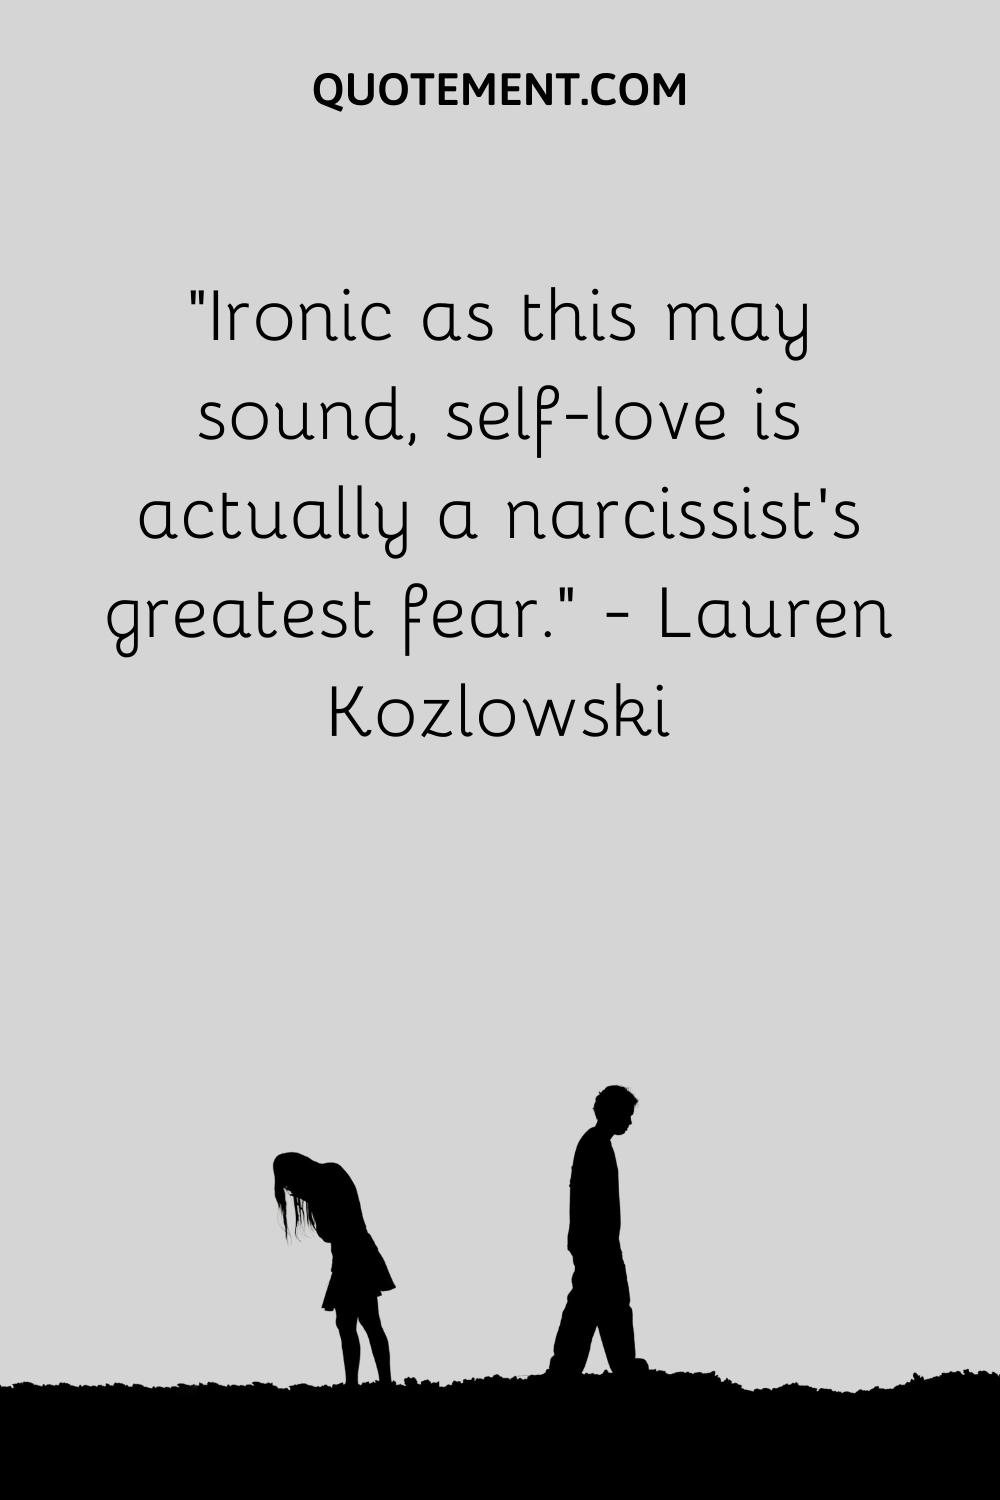 Ironic as this may sound, self-love is actually a narcissist's greatest fear